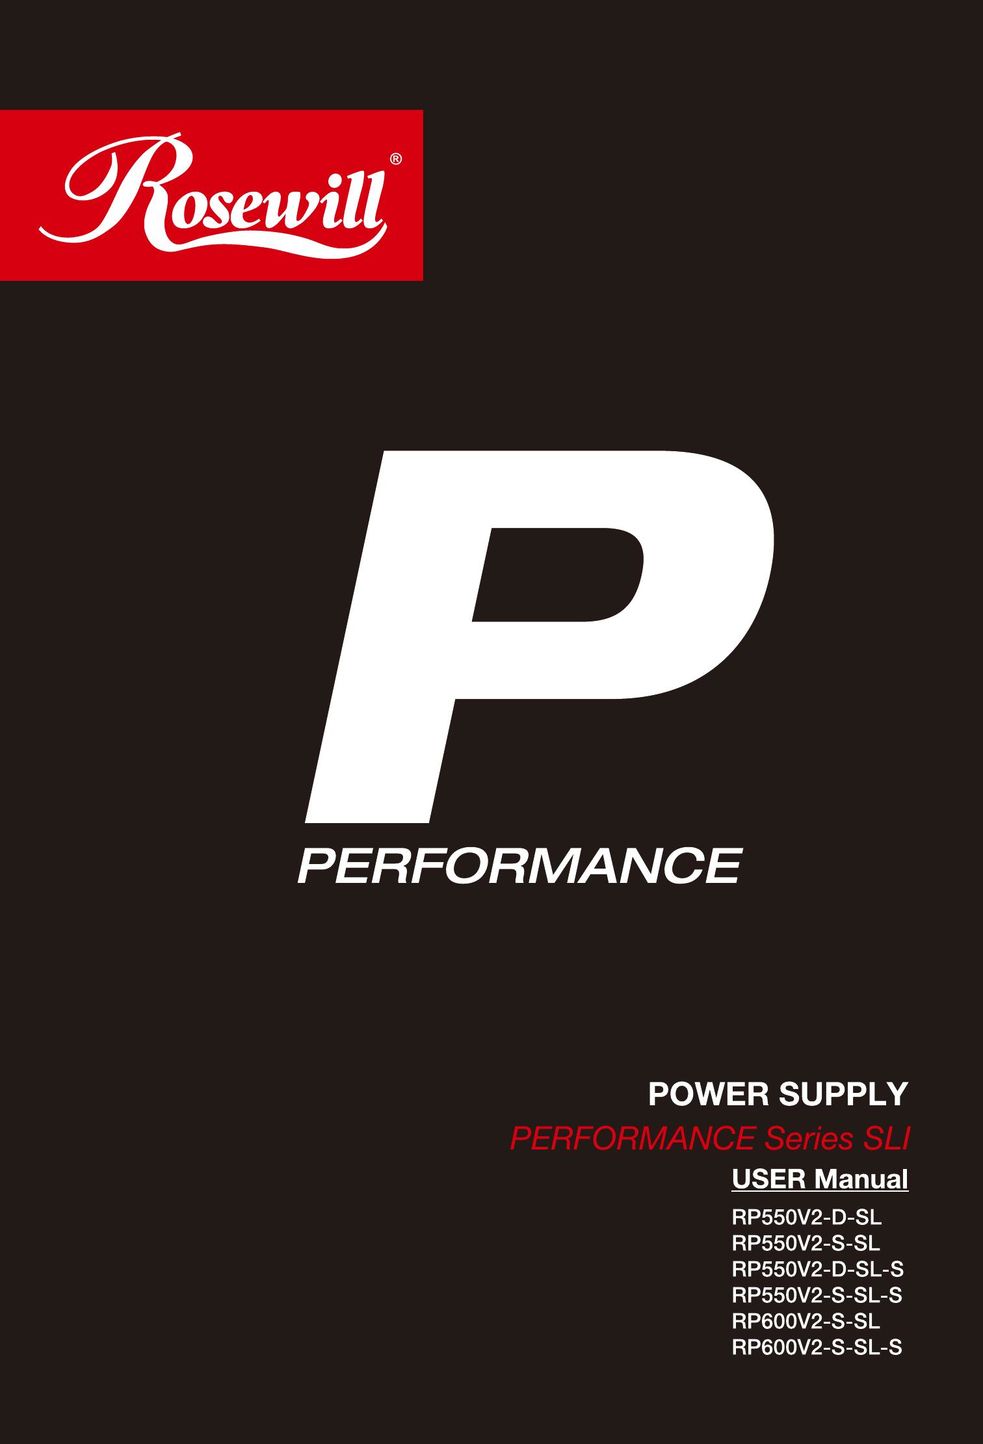 Rosewill RP600V2-S-SL Power Supply User Manual